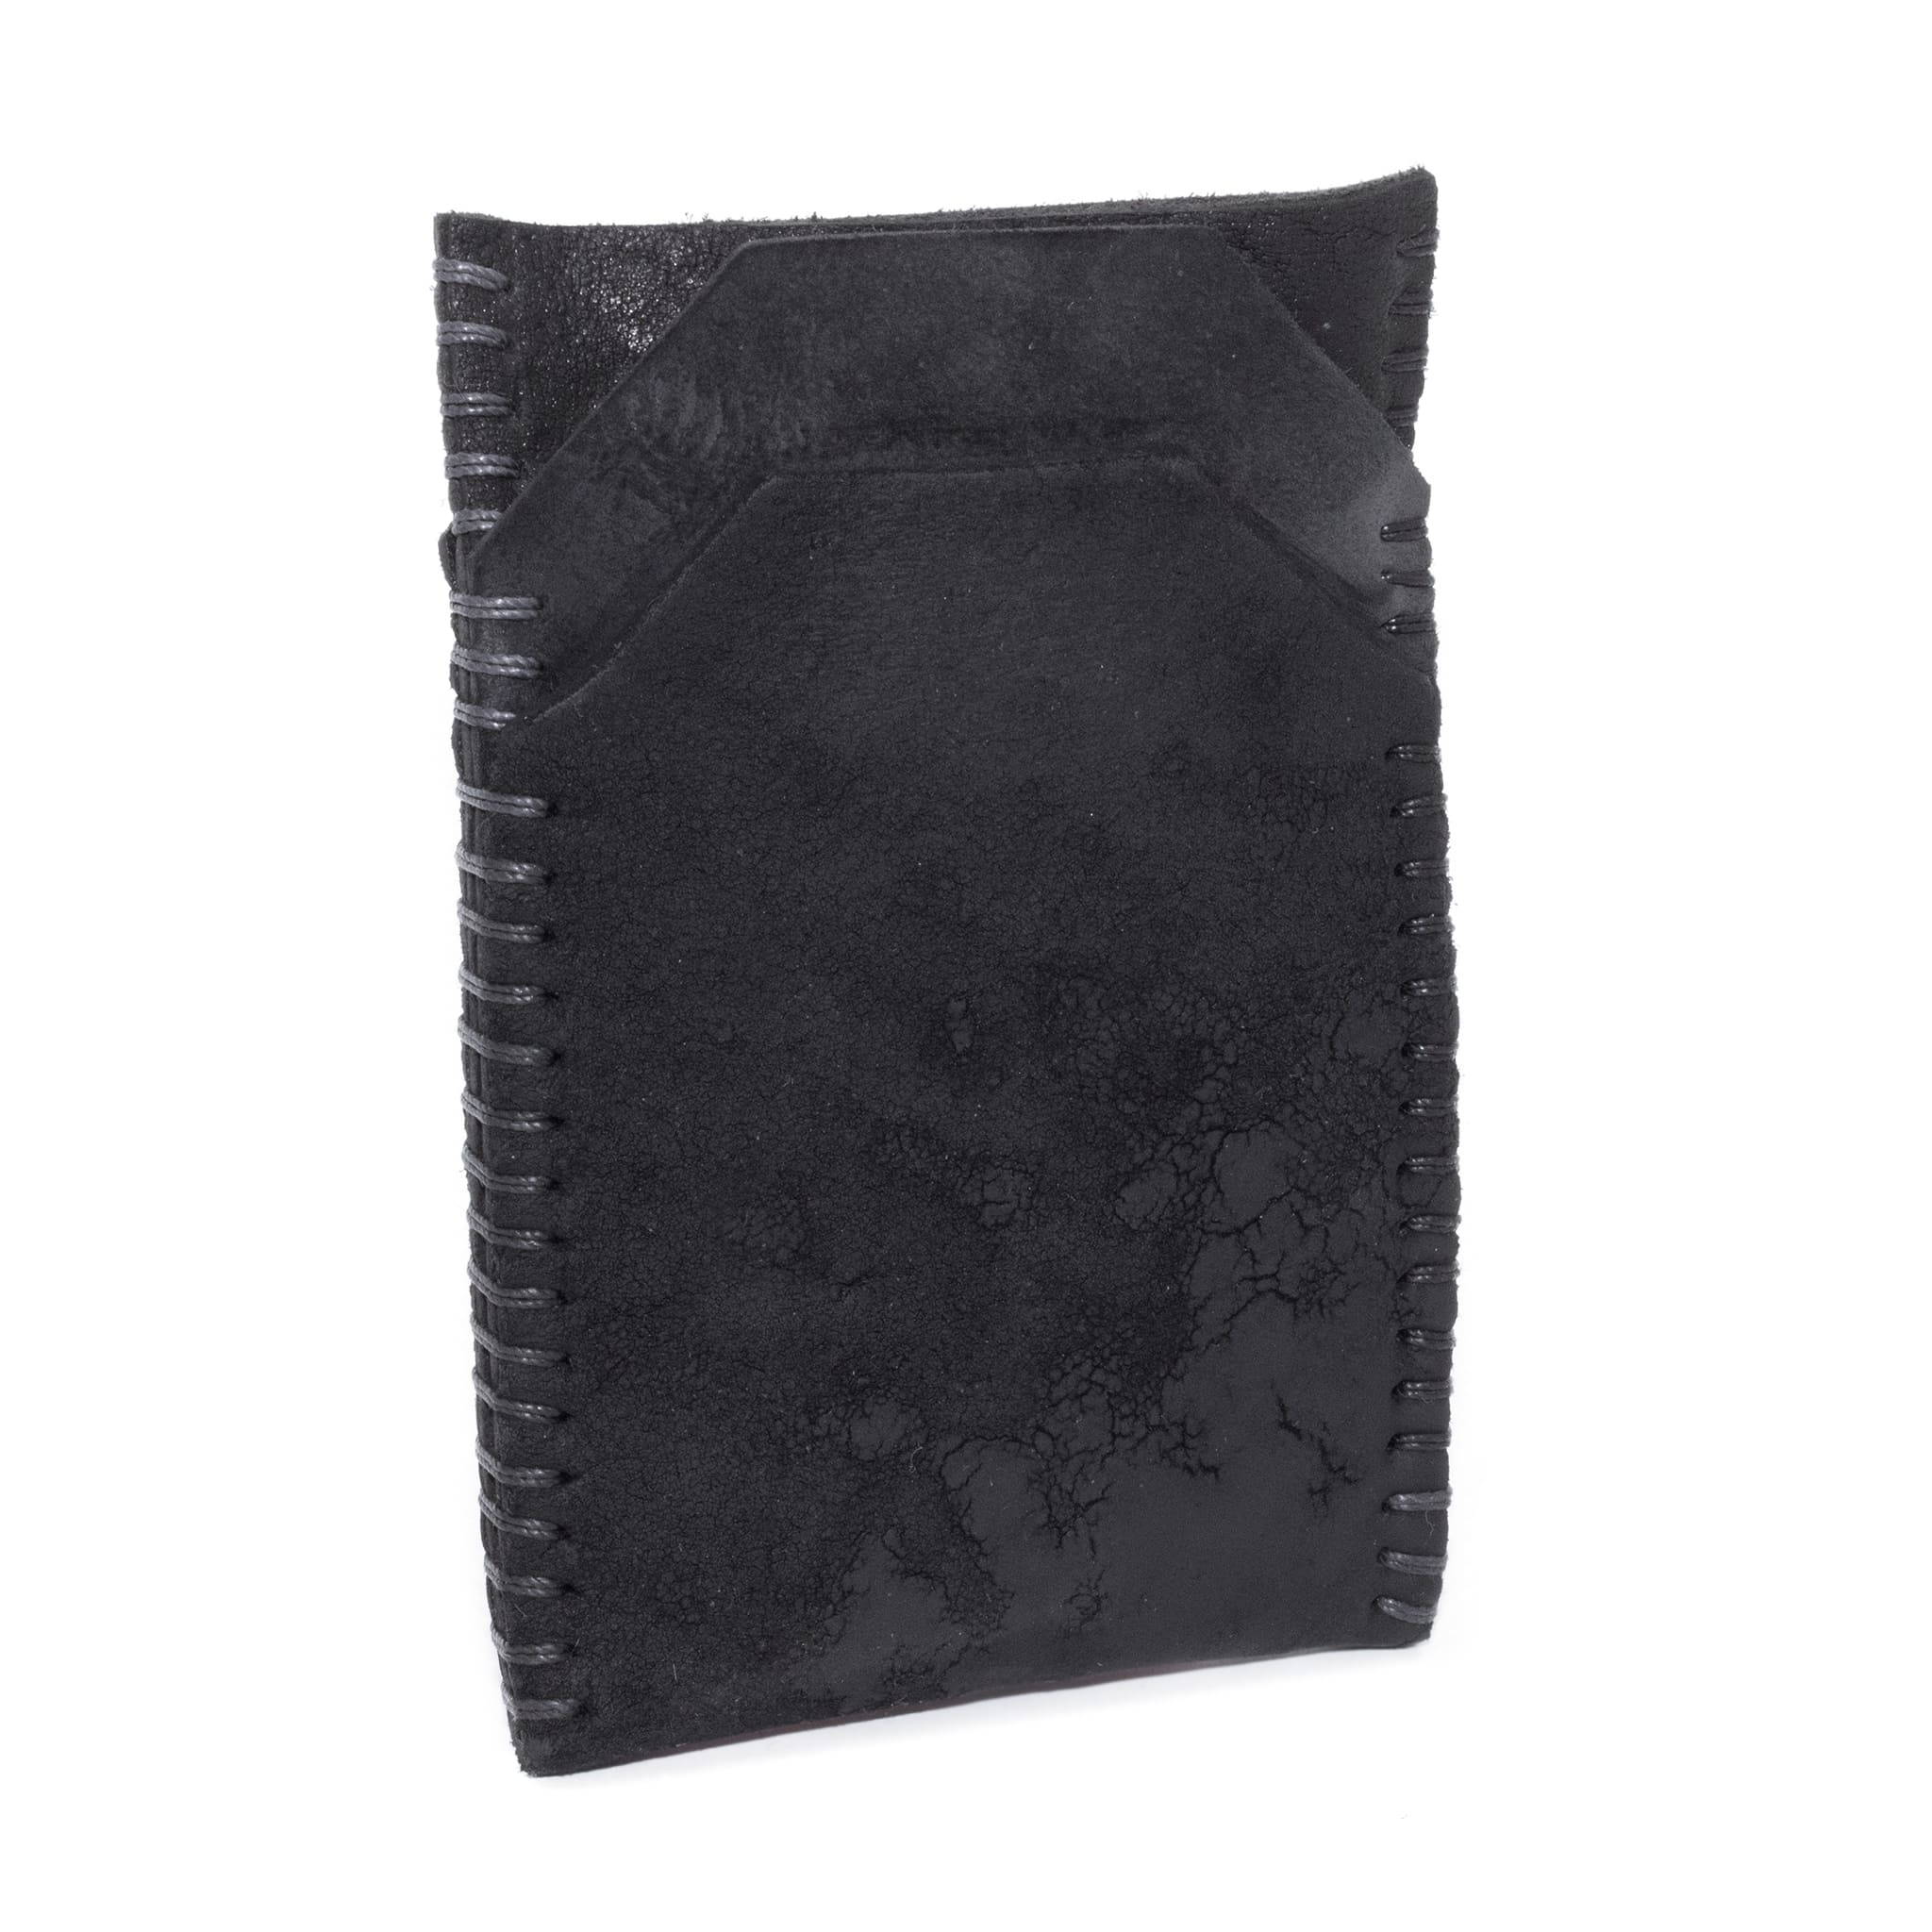 object dyed matte black reverse culatta 5 pocket cardholder with hand stitched overlocked sides from atelier skn